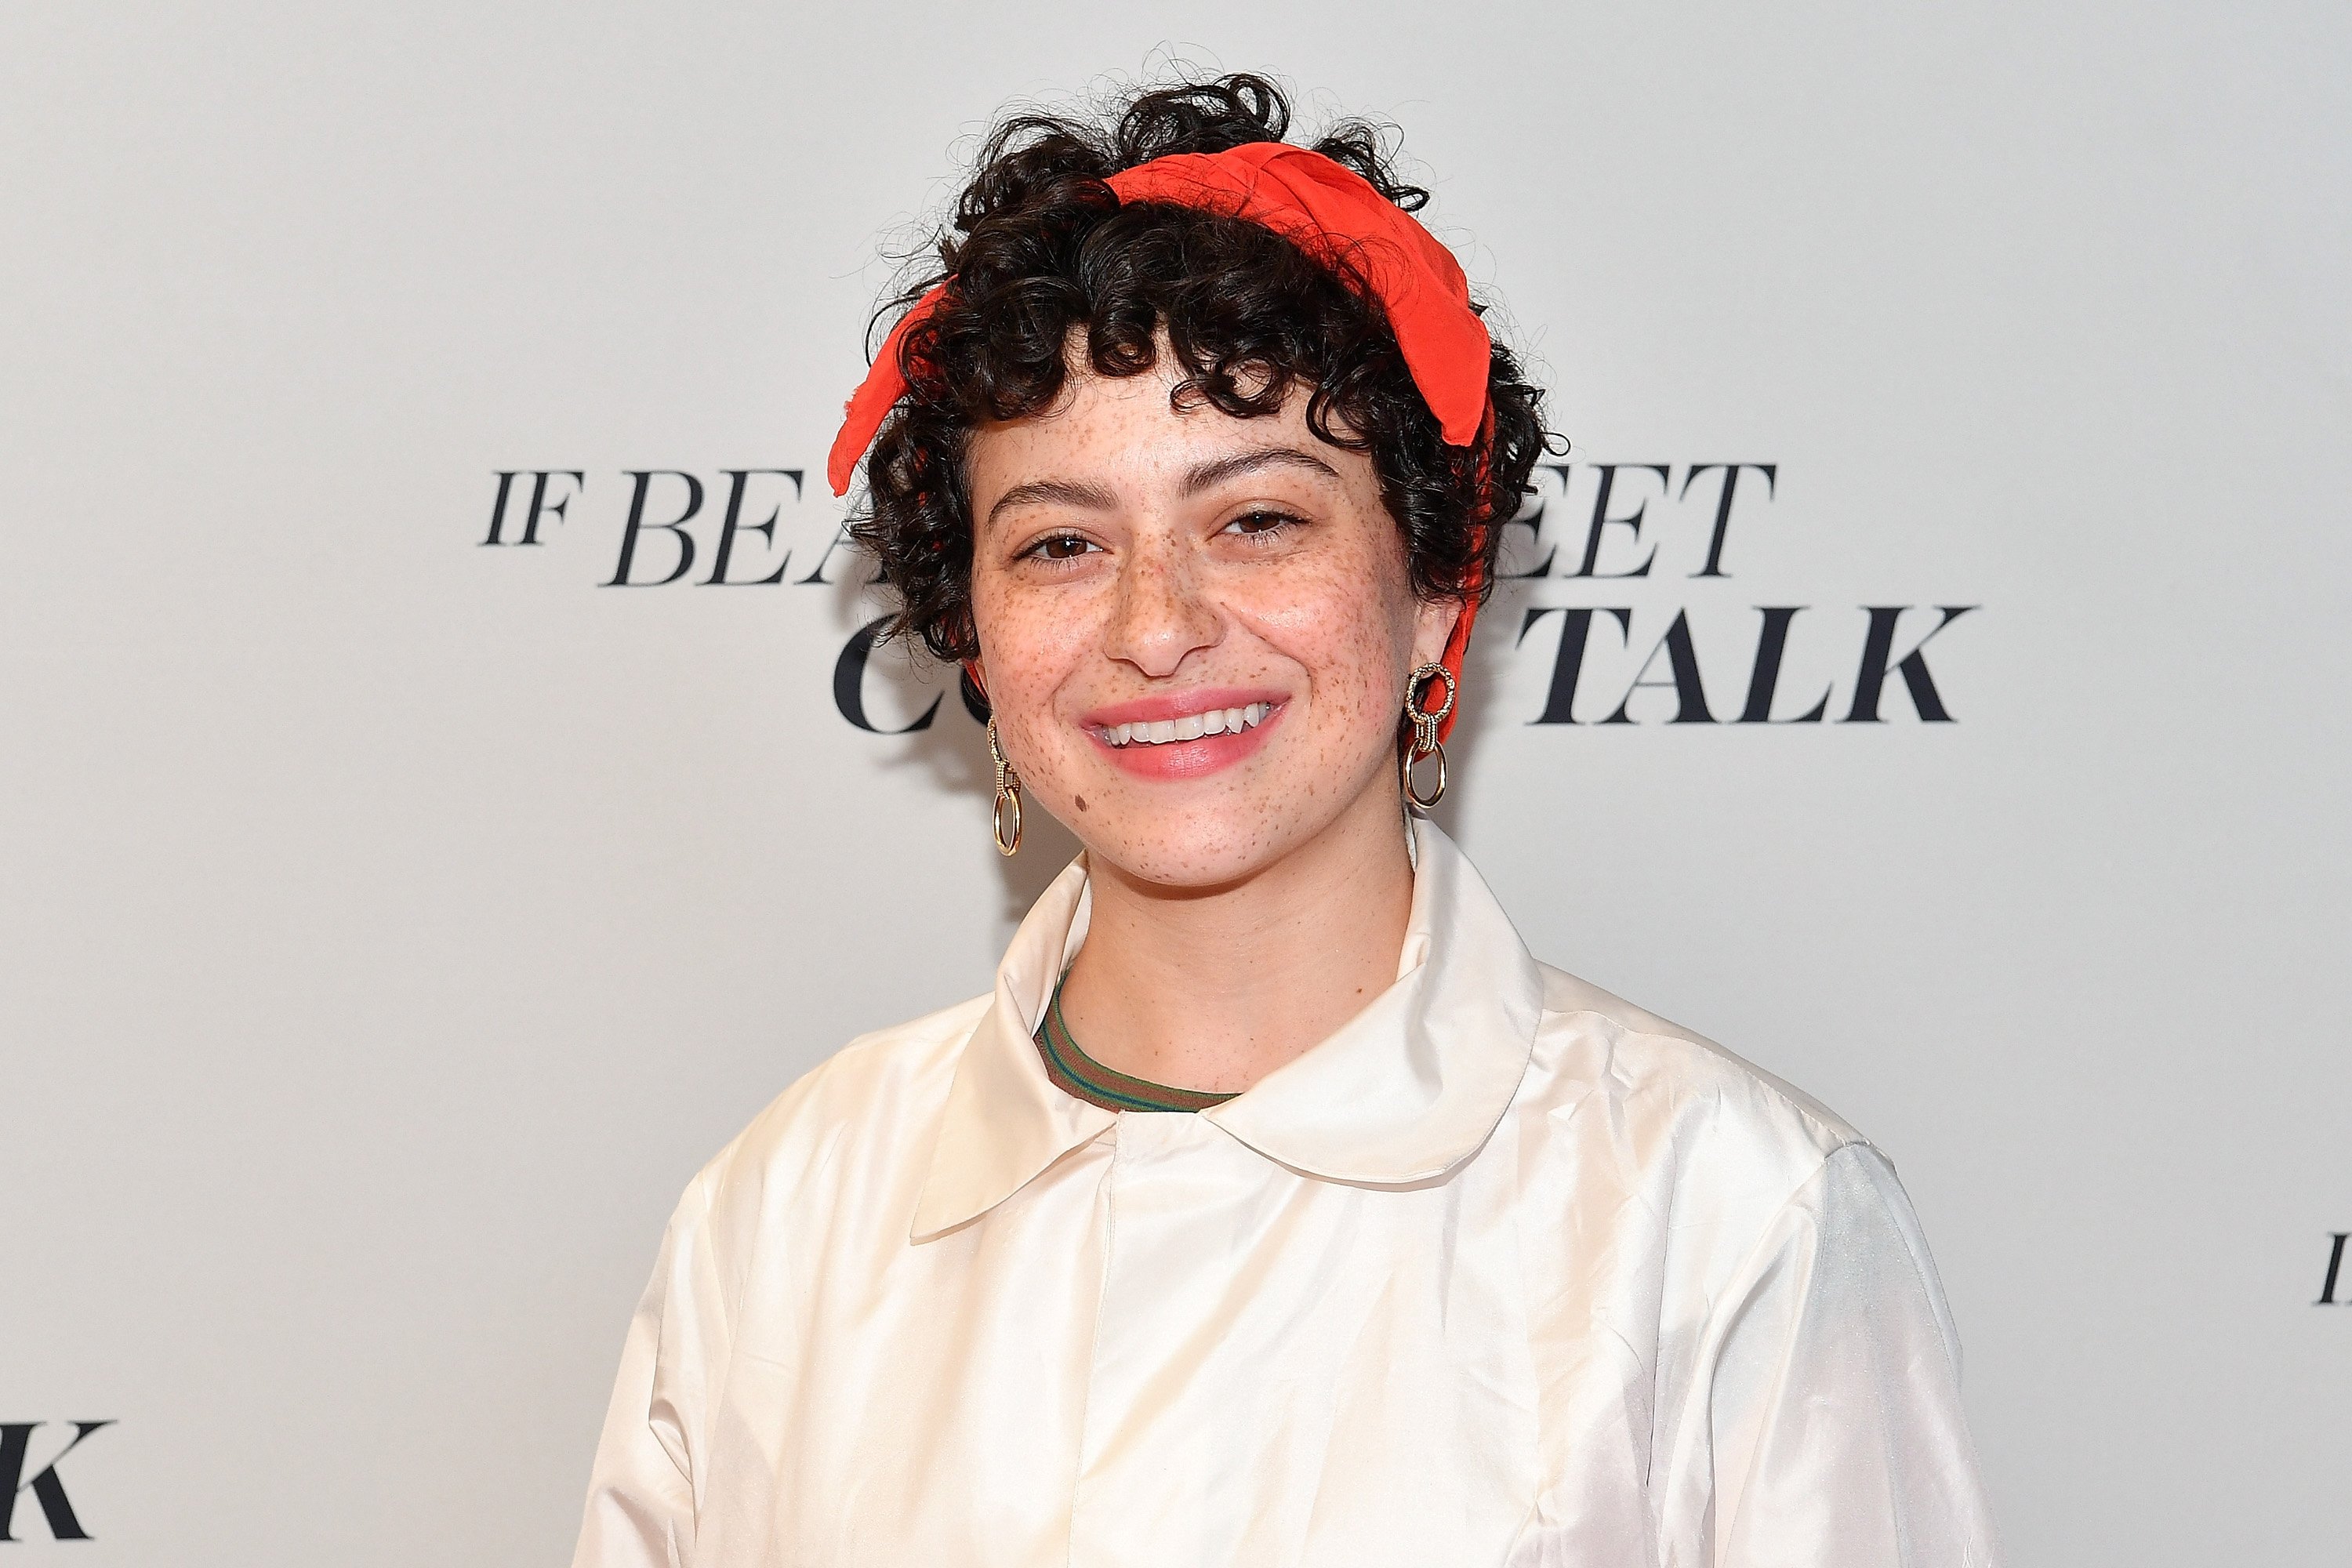 Alia Shawkat at the US premiere of "If Beale Street Could Talk" on October 9, 2018 | Source: Getty Images